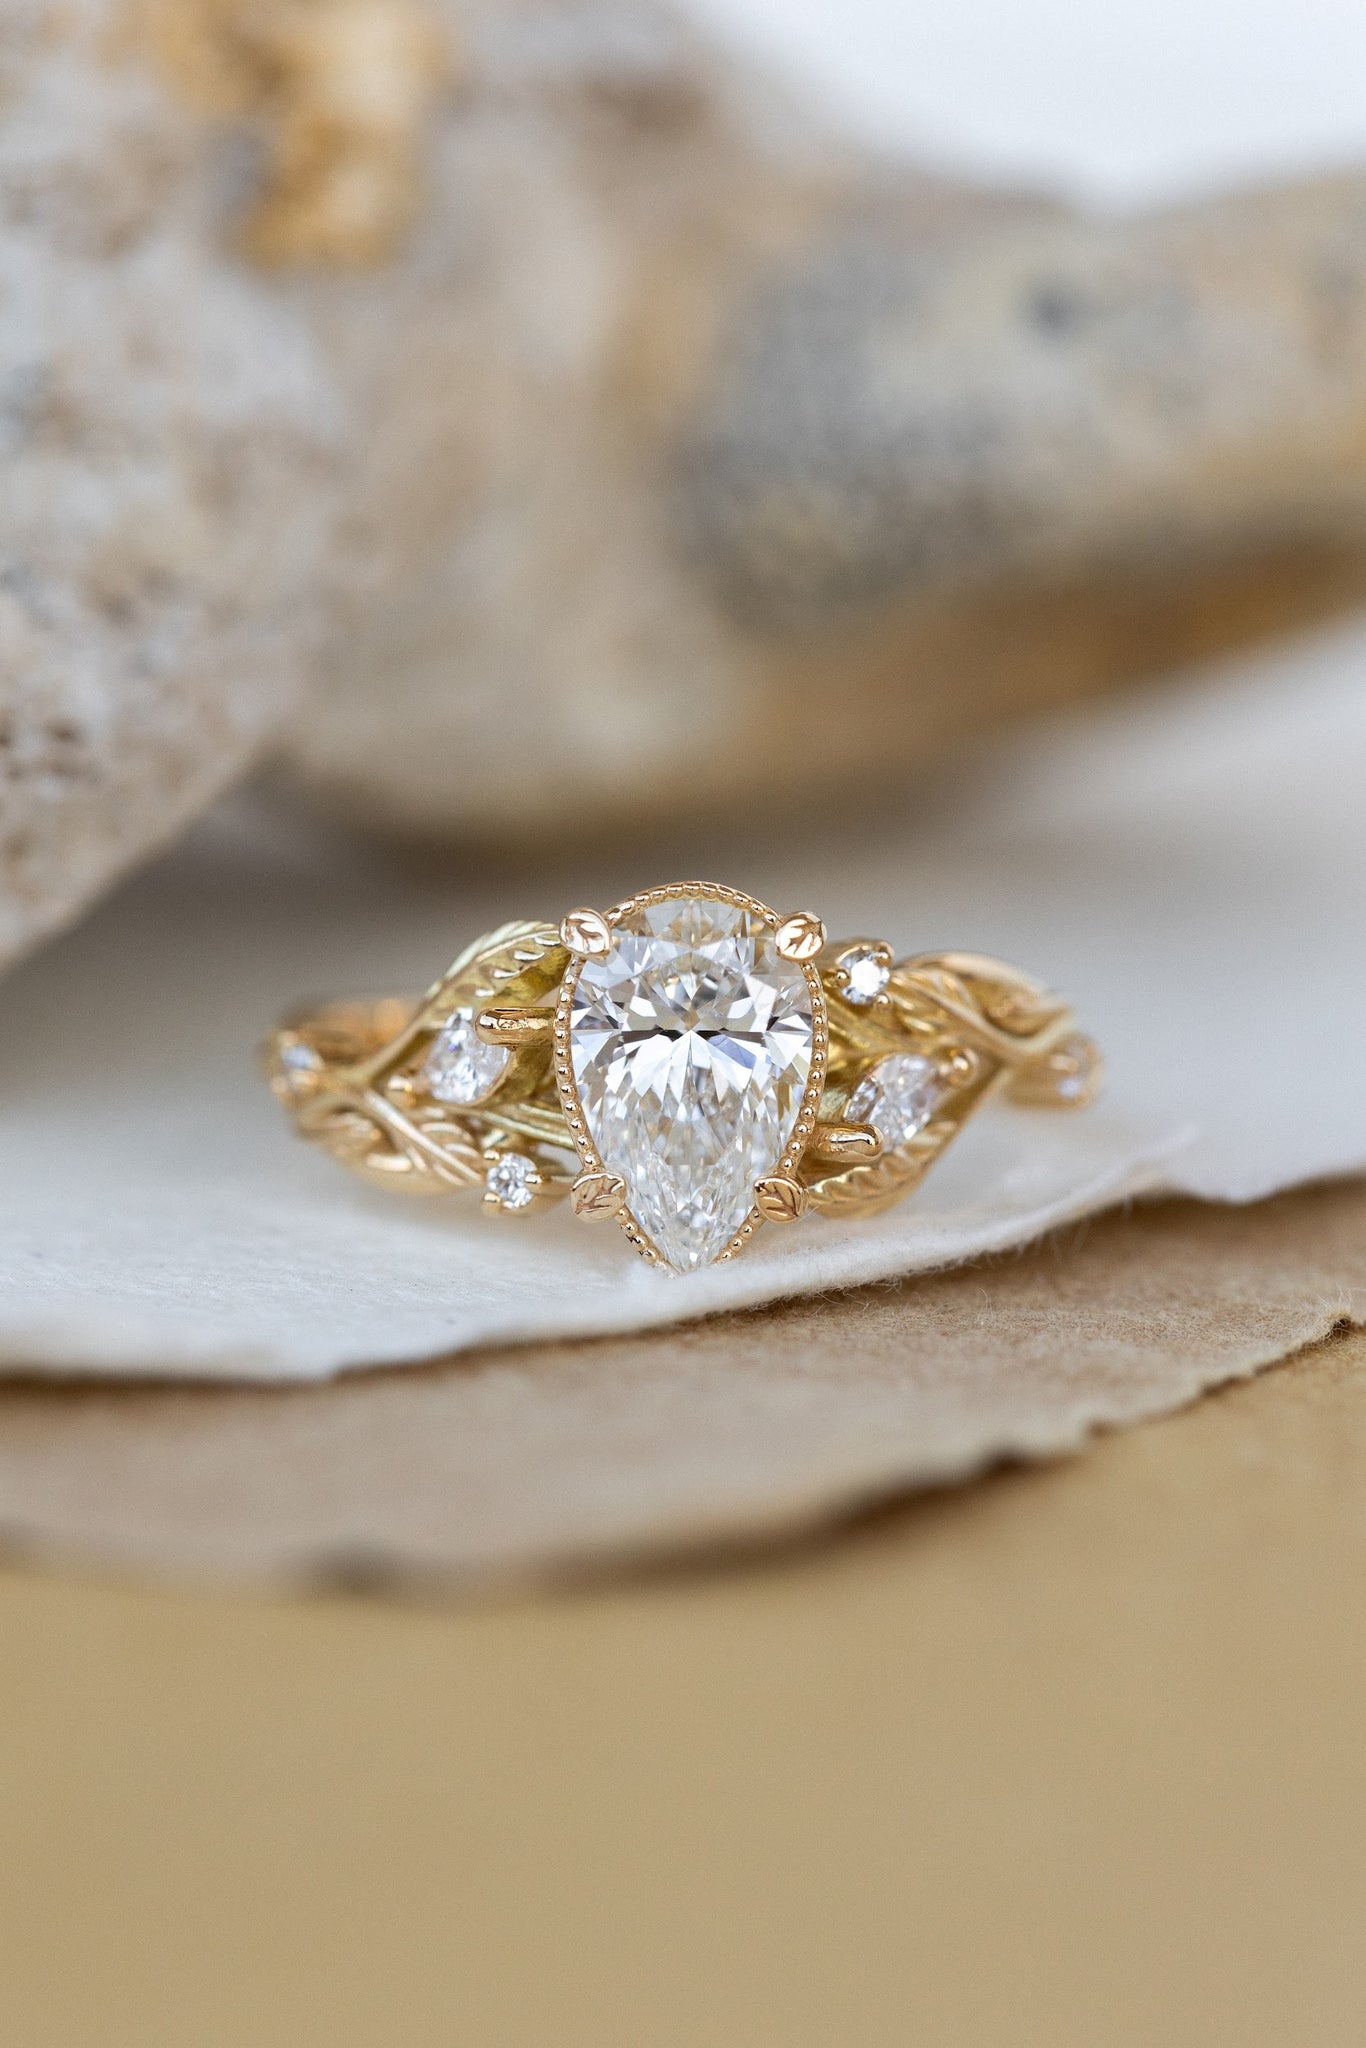 Lab grown diamond engagement ring, gold nature inspired ring with leaves and diamonds / Patricia - Eden Garden Jewelry™